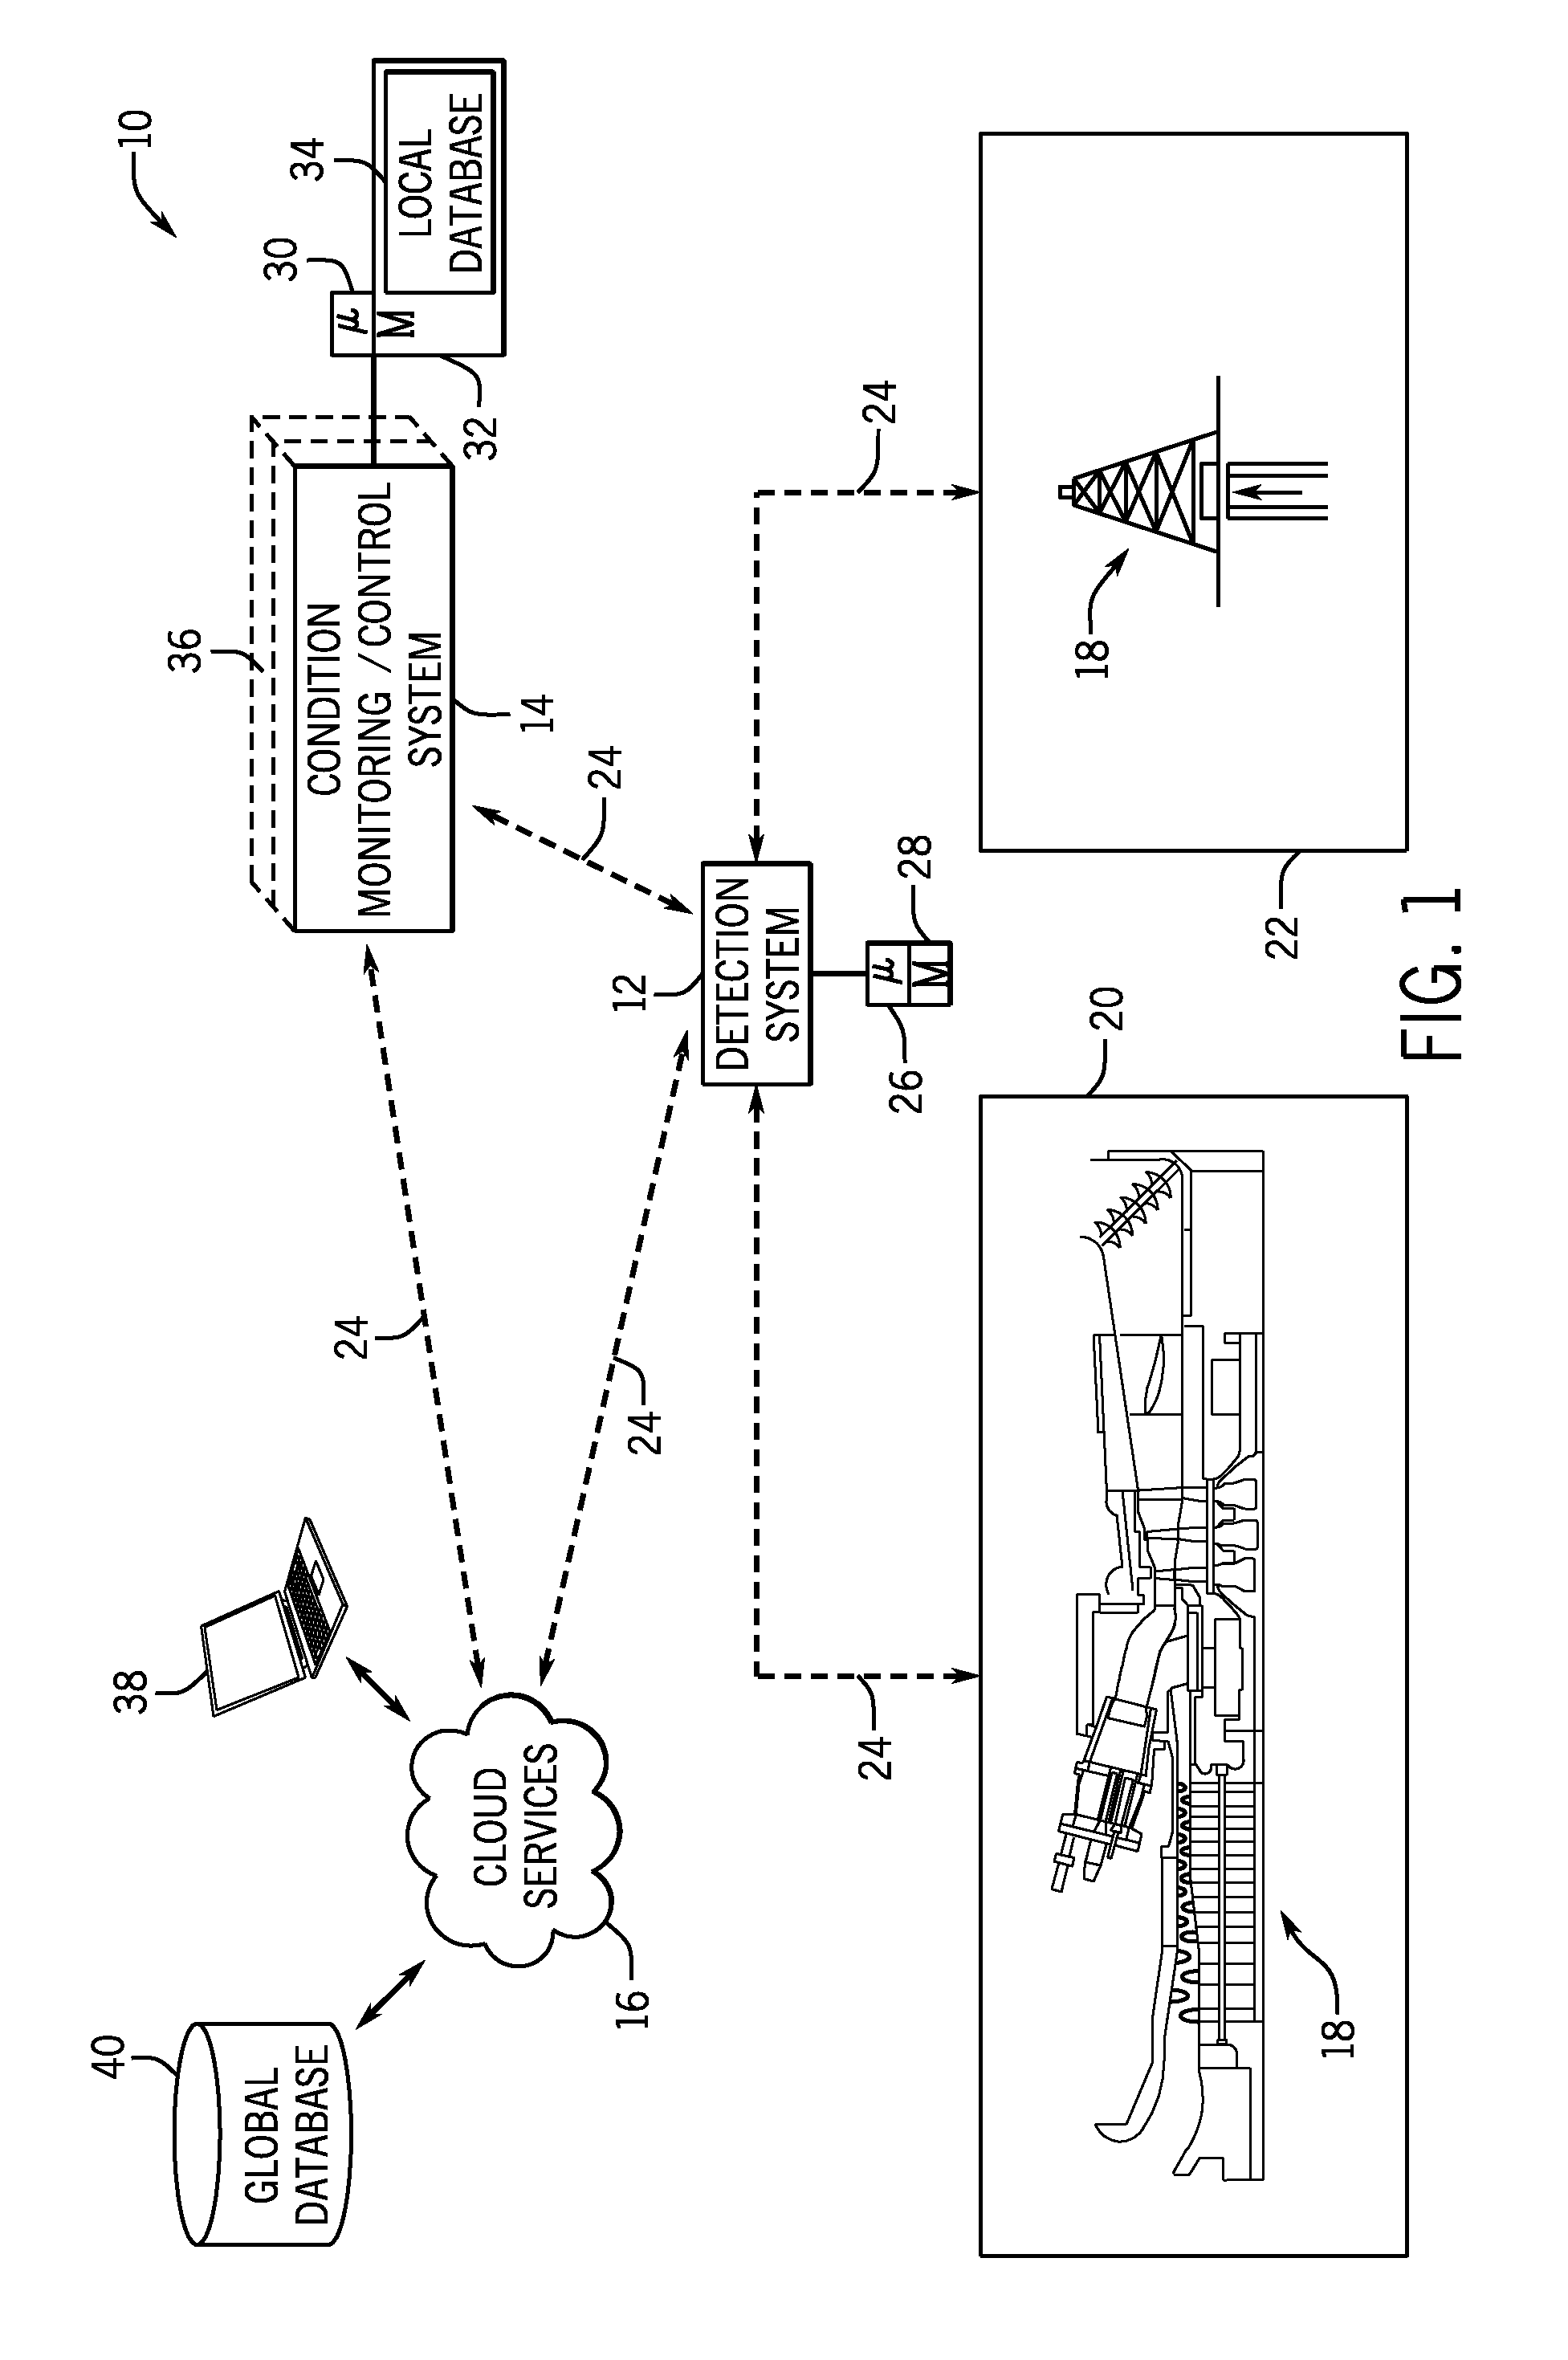 Vibration condition monitoring system and methods